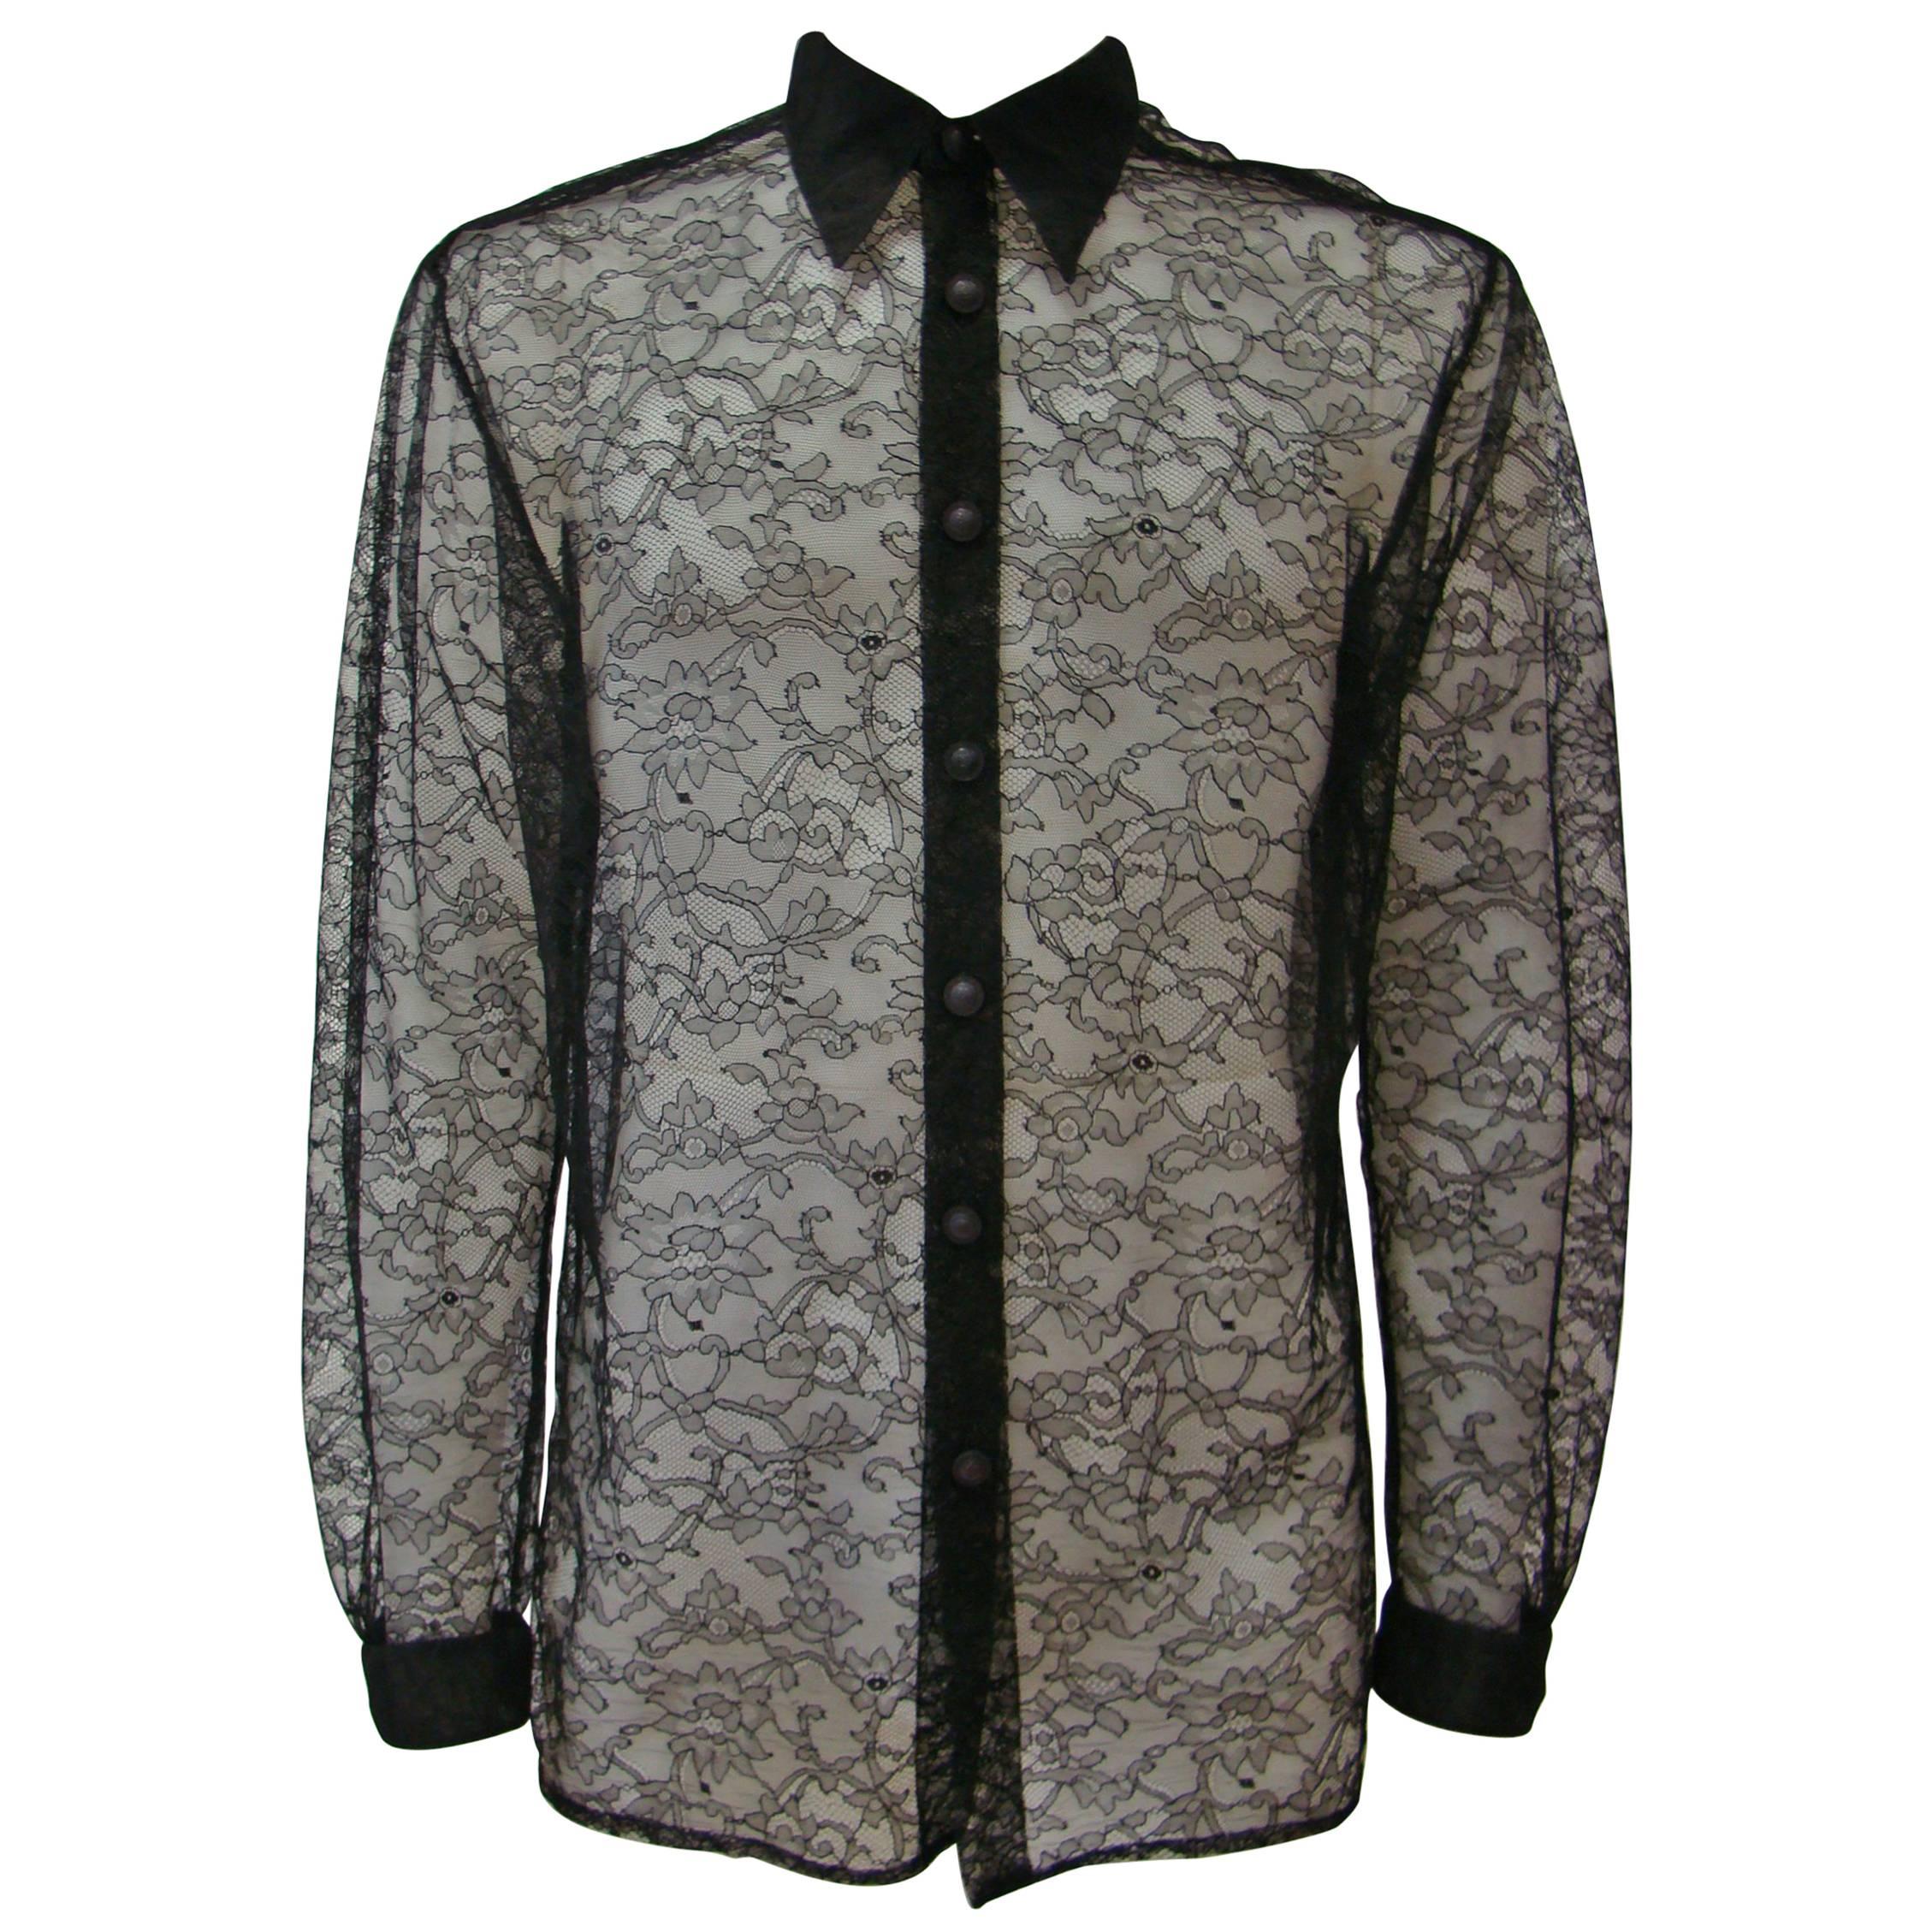 Iconic Gianni Versace Silk Lace Punk Collection Shirt Spring 1994 For Sale